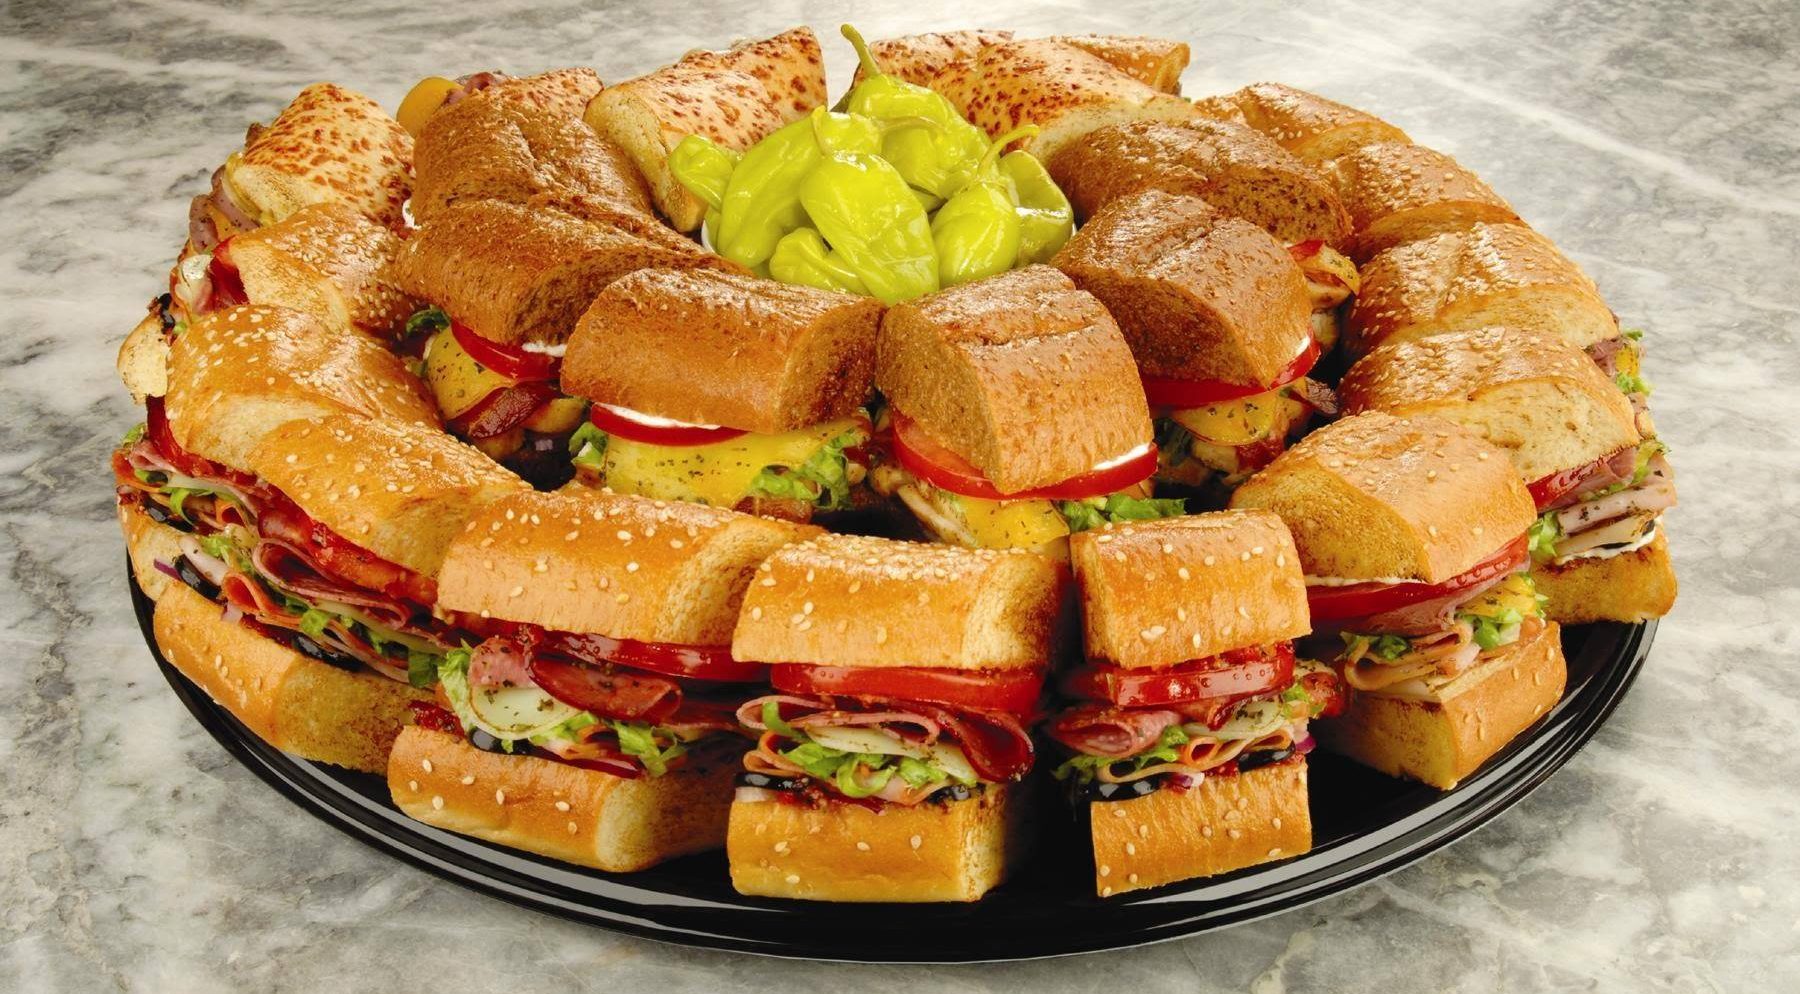 A tray full of sandwiches on a marble table.